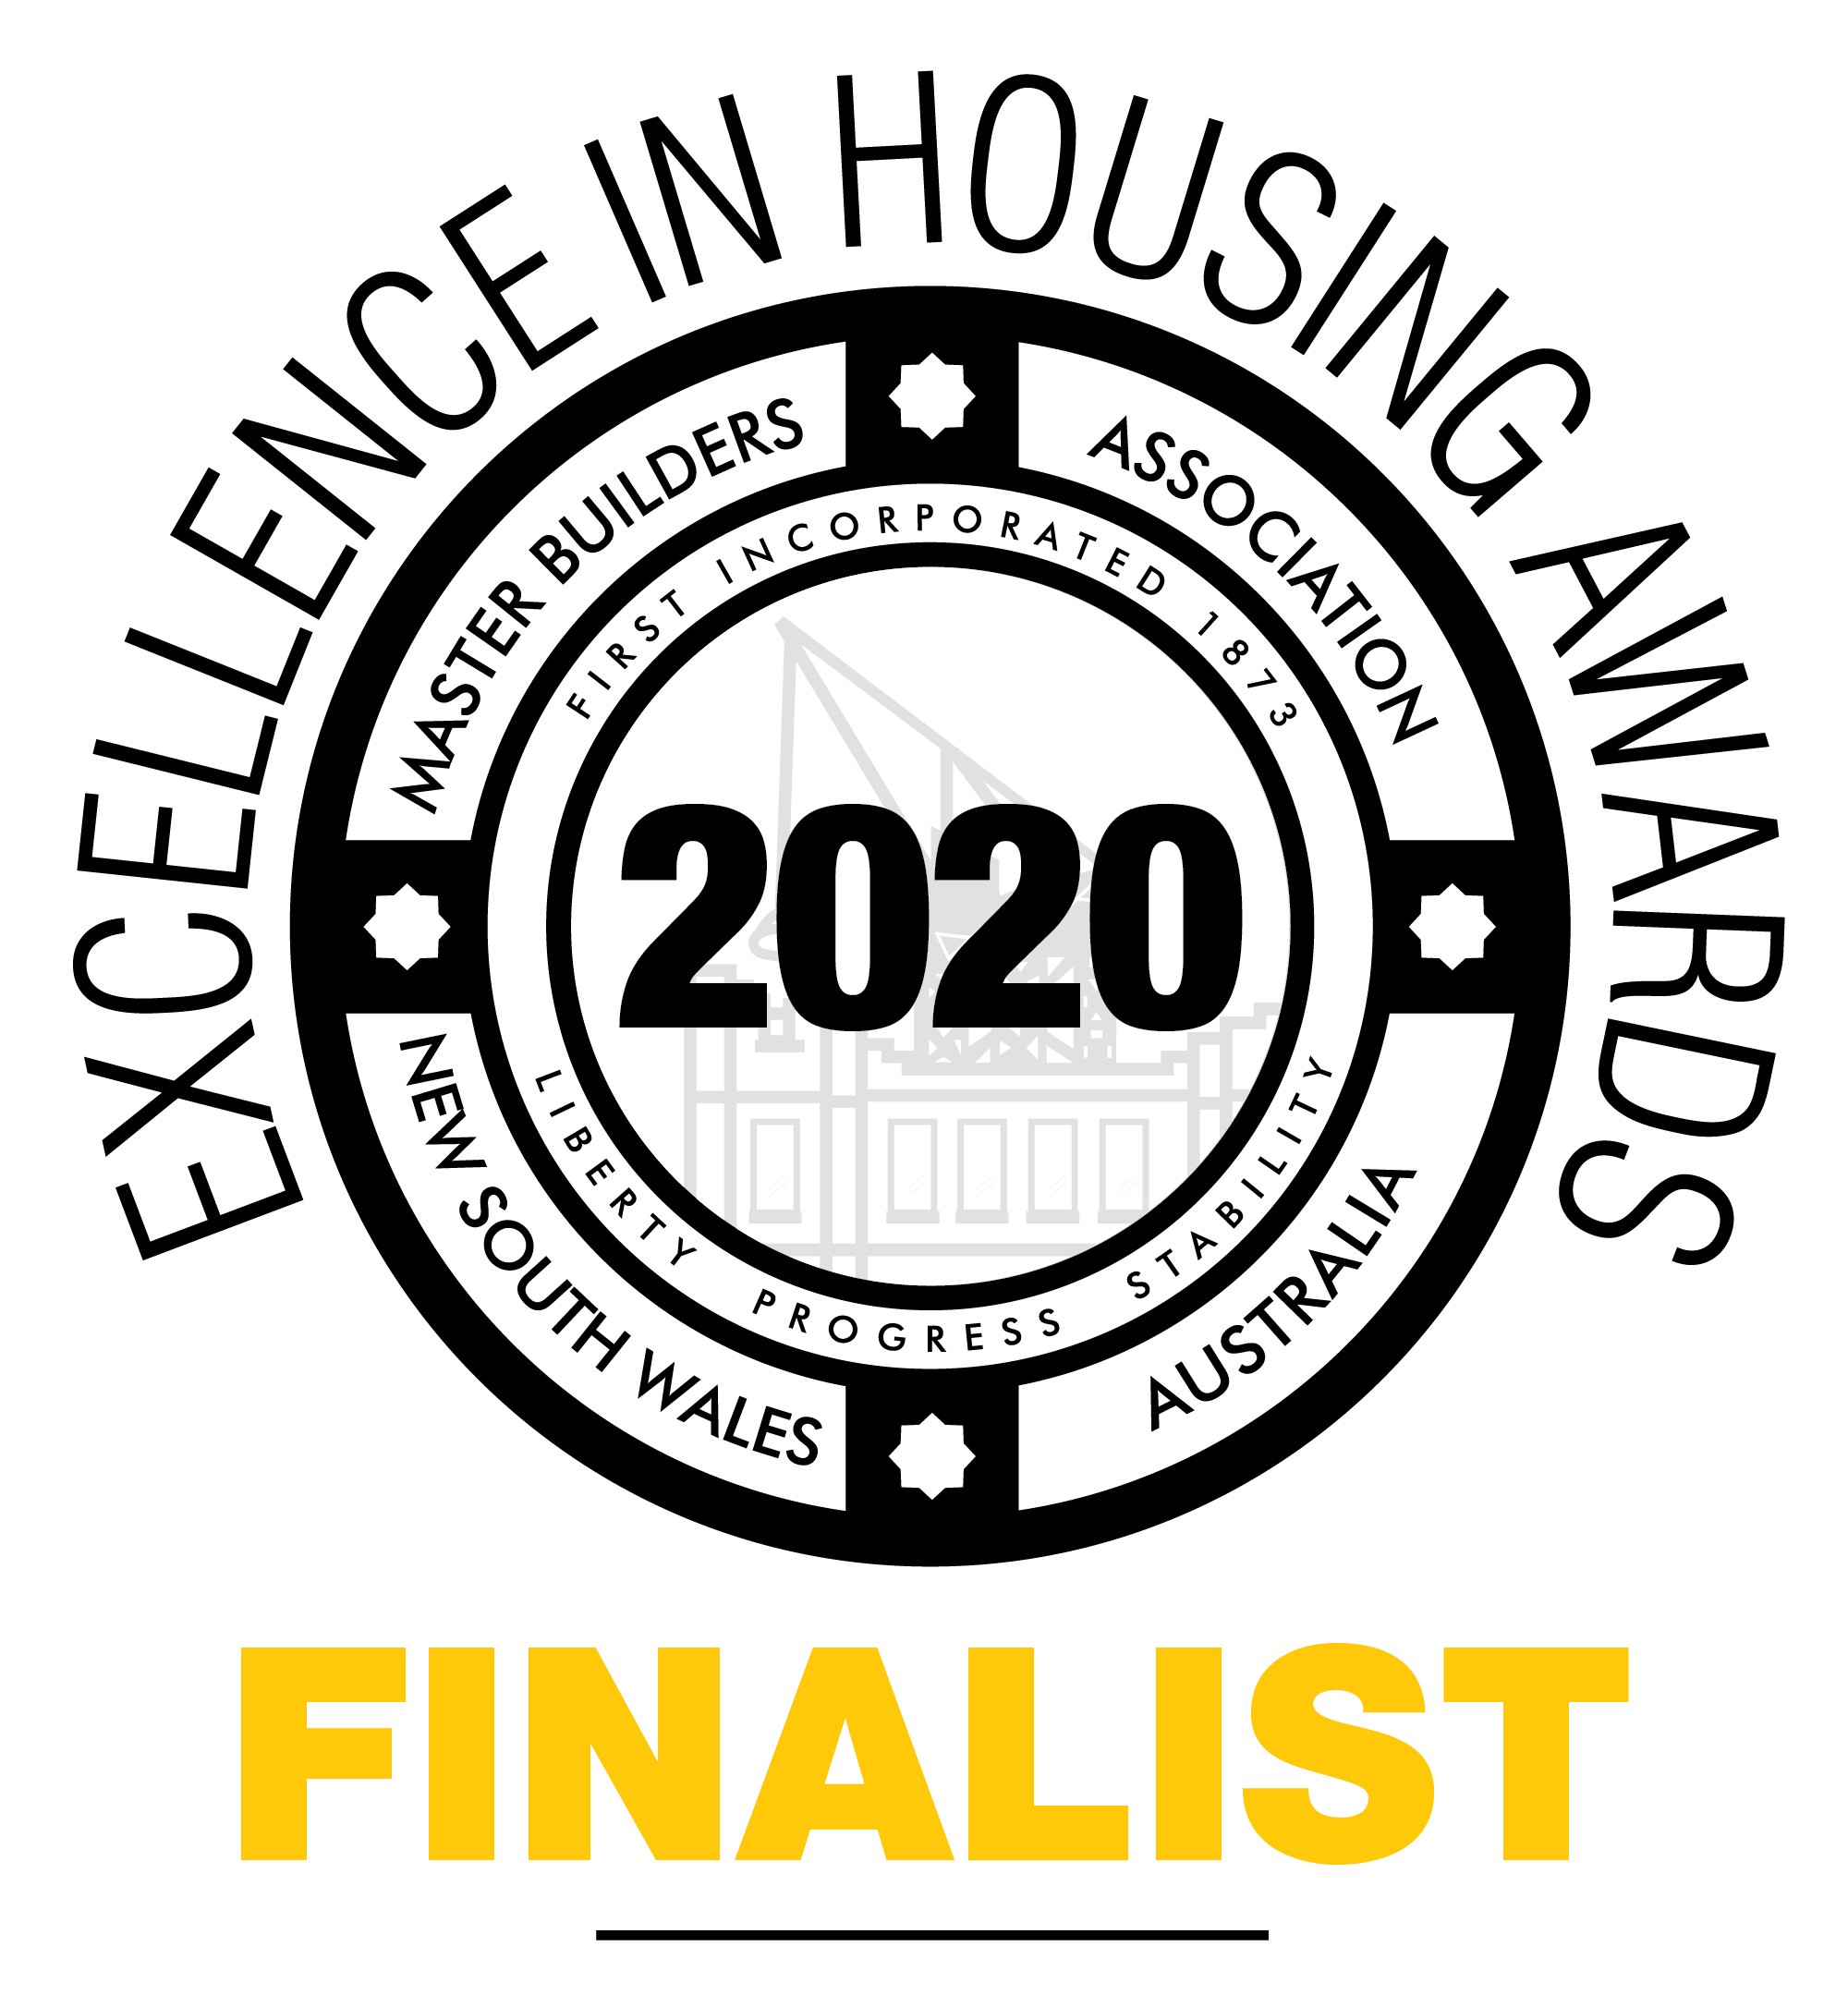 Excellence in Housing Award Finalist 2020